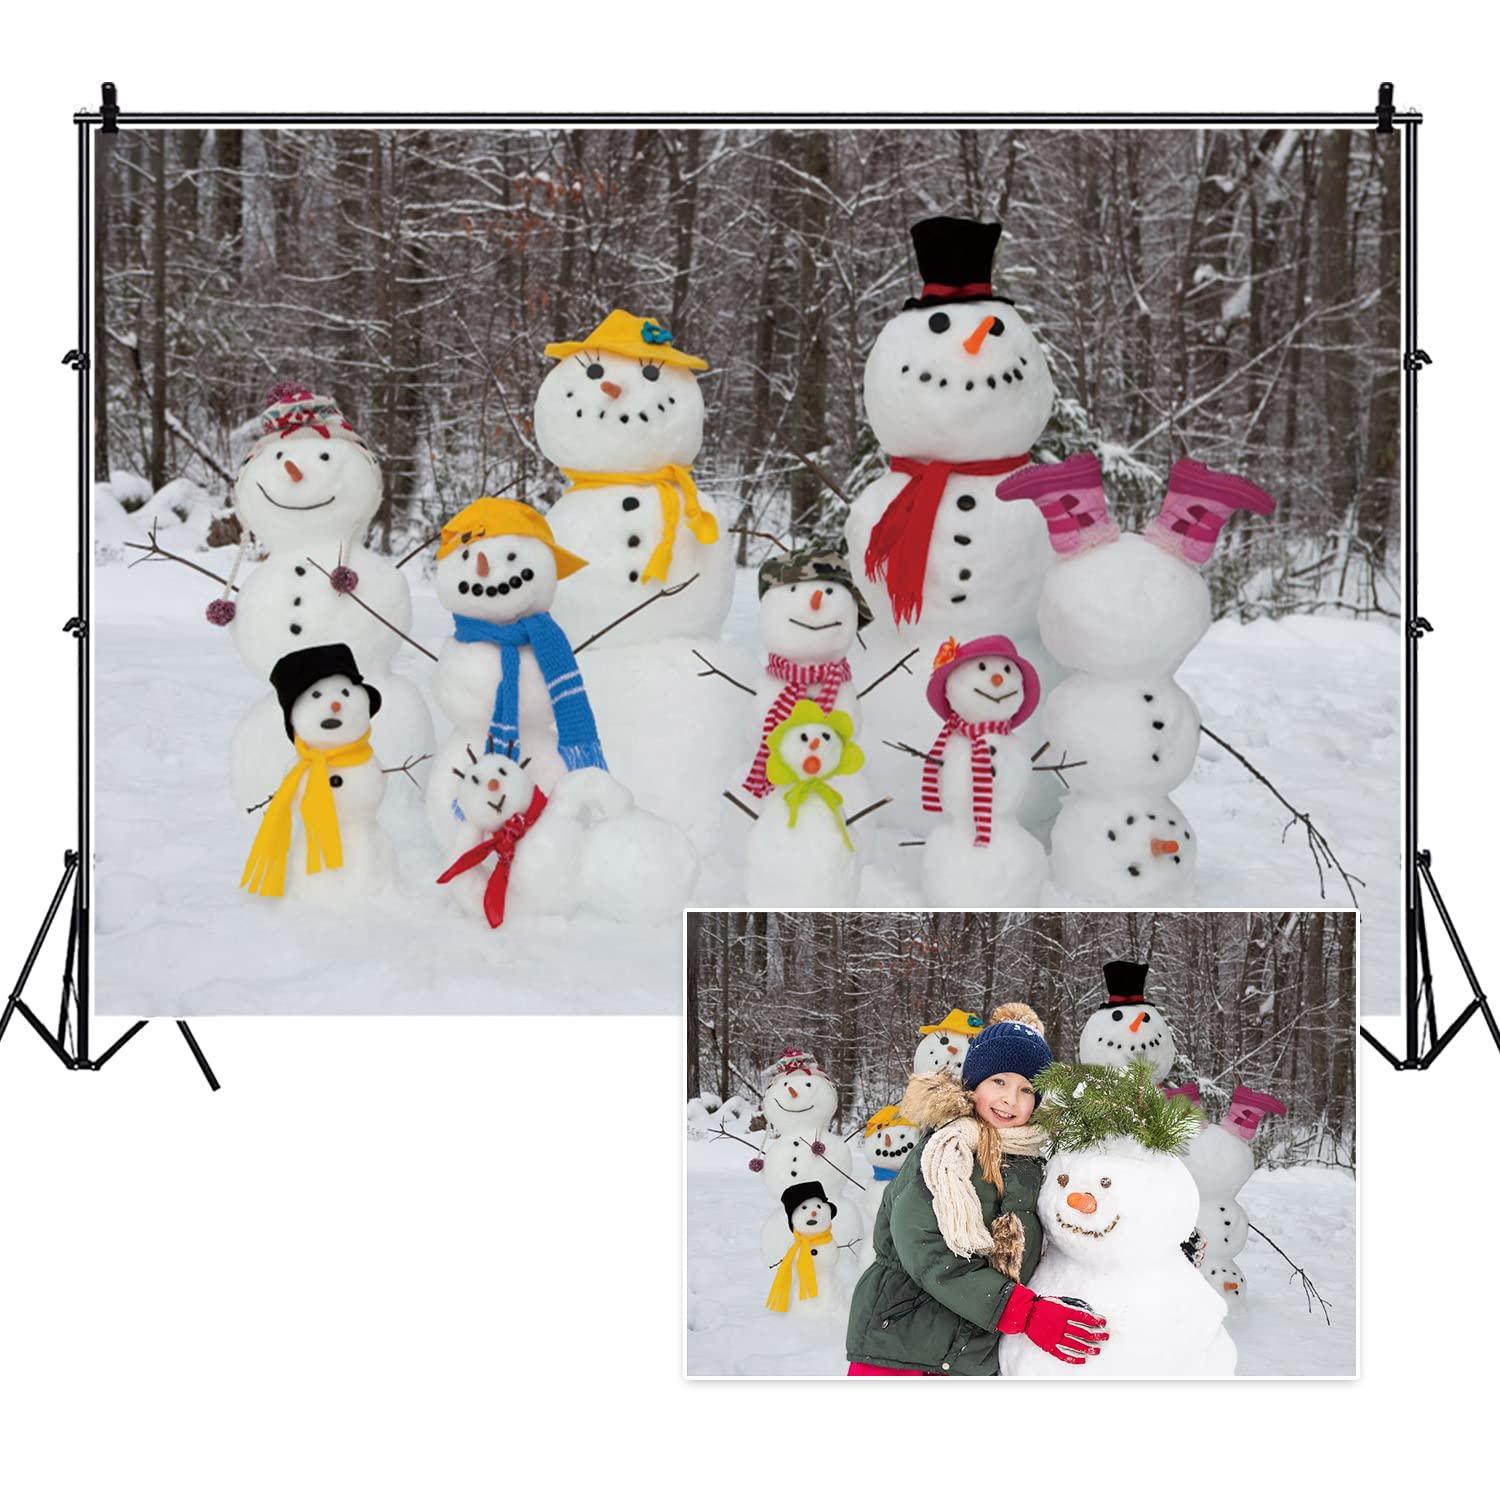 Amazoncom Funny Snowman Family 7x5ft Photography Backdrop for